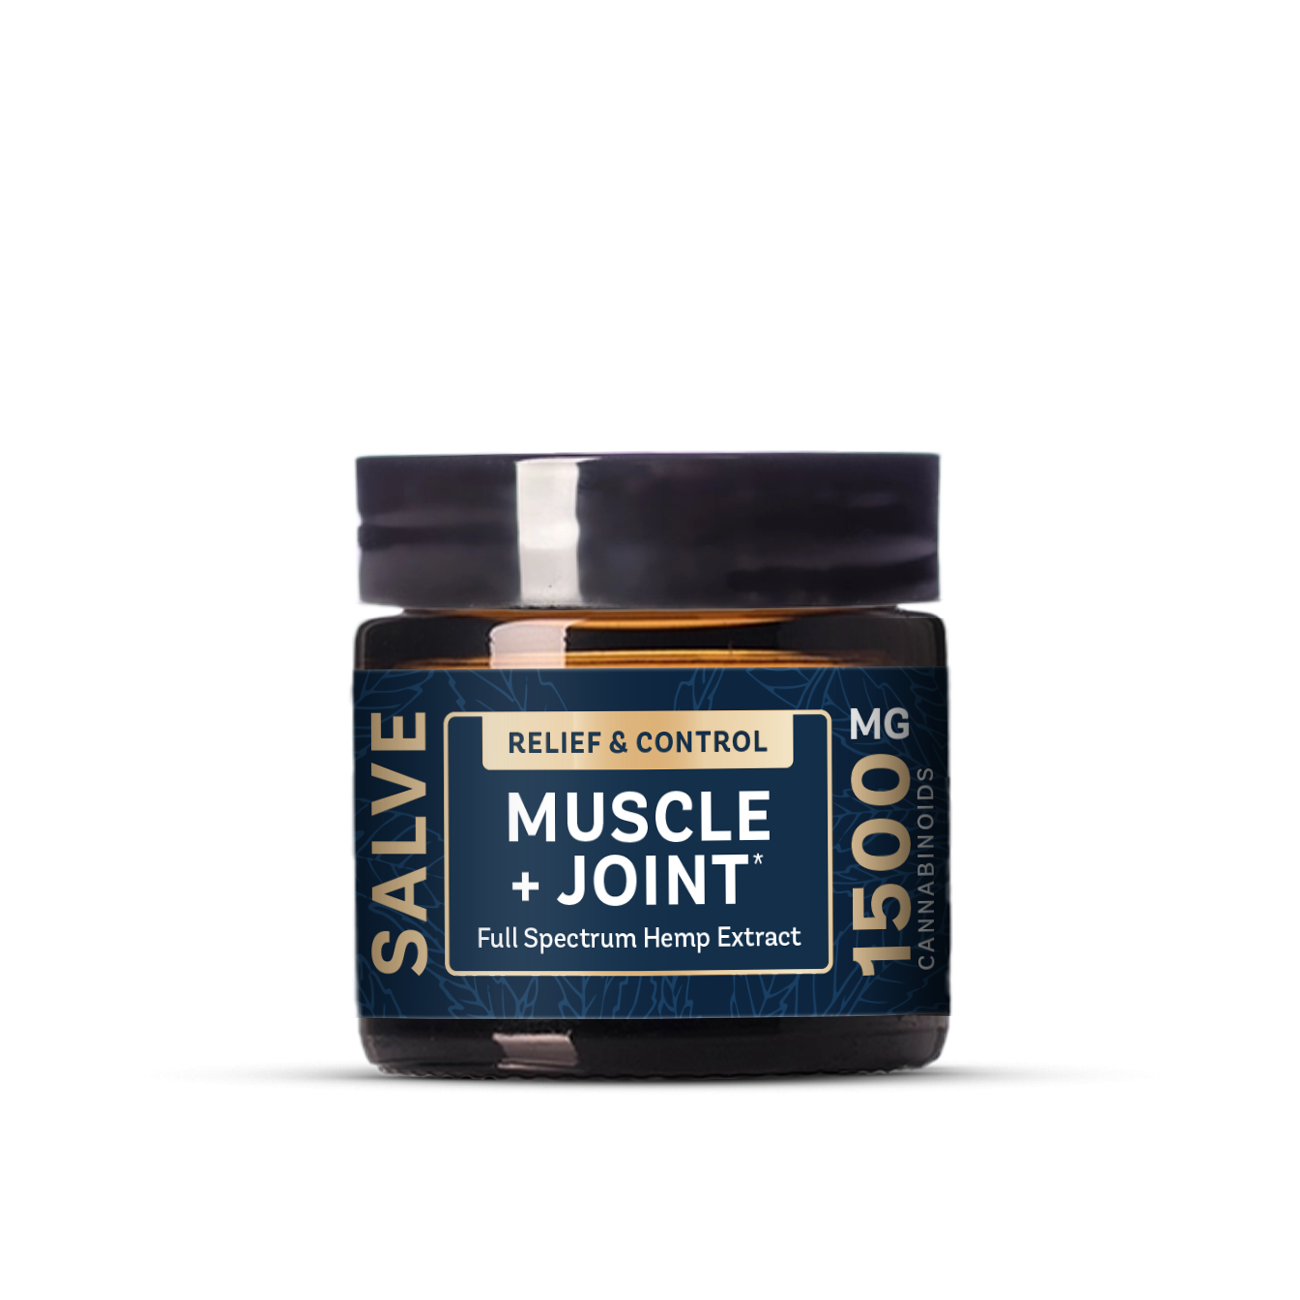 Muscle + Joint Salve